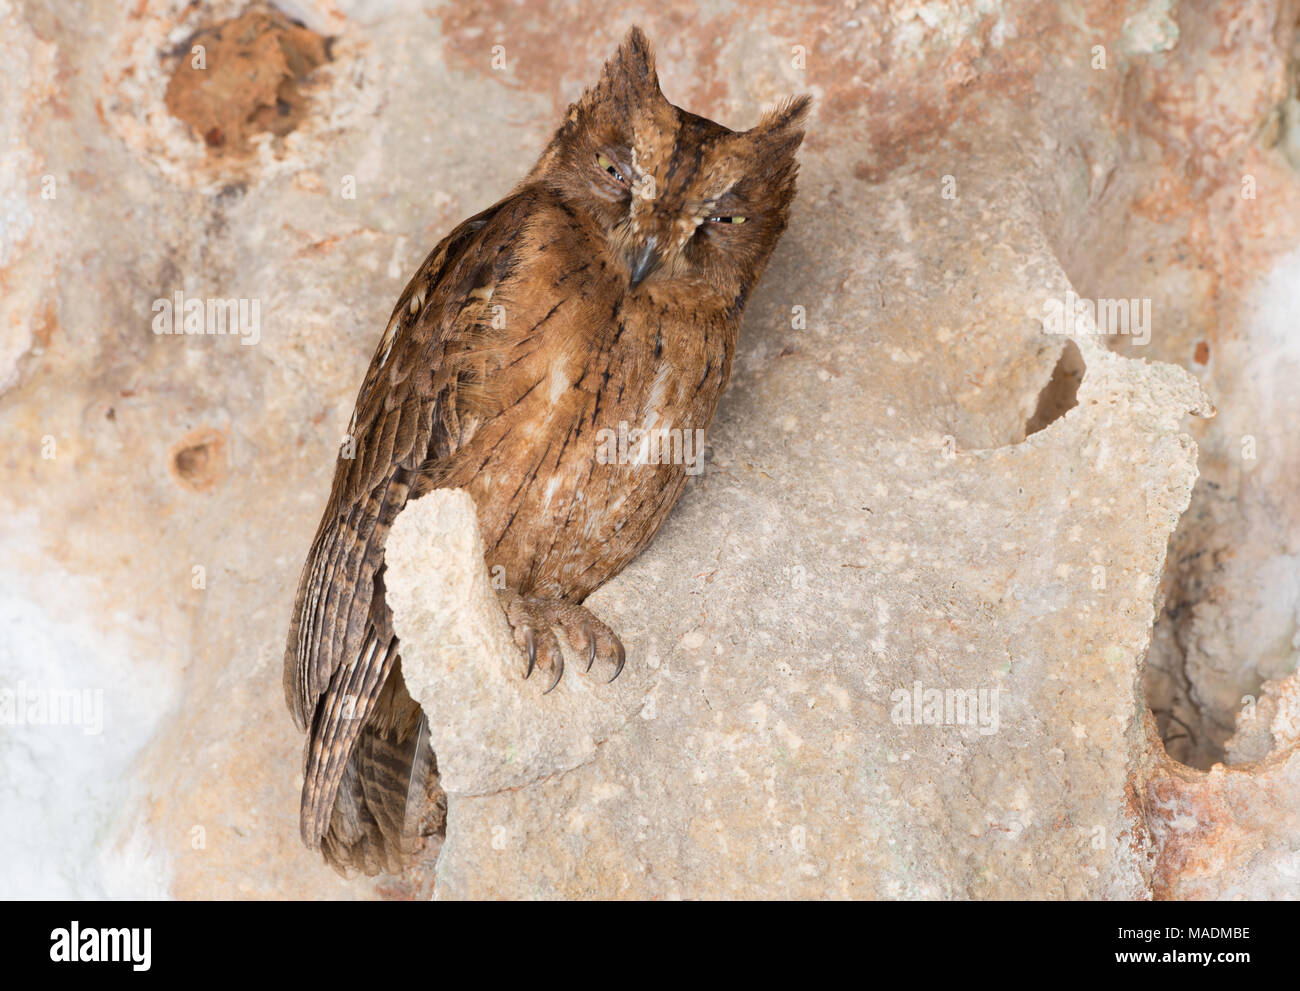 A Madagascar Scops Owl (Otus rutilus) resting on a sheltered rock wall Stock Photo